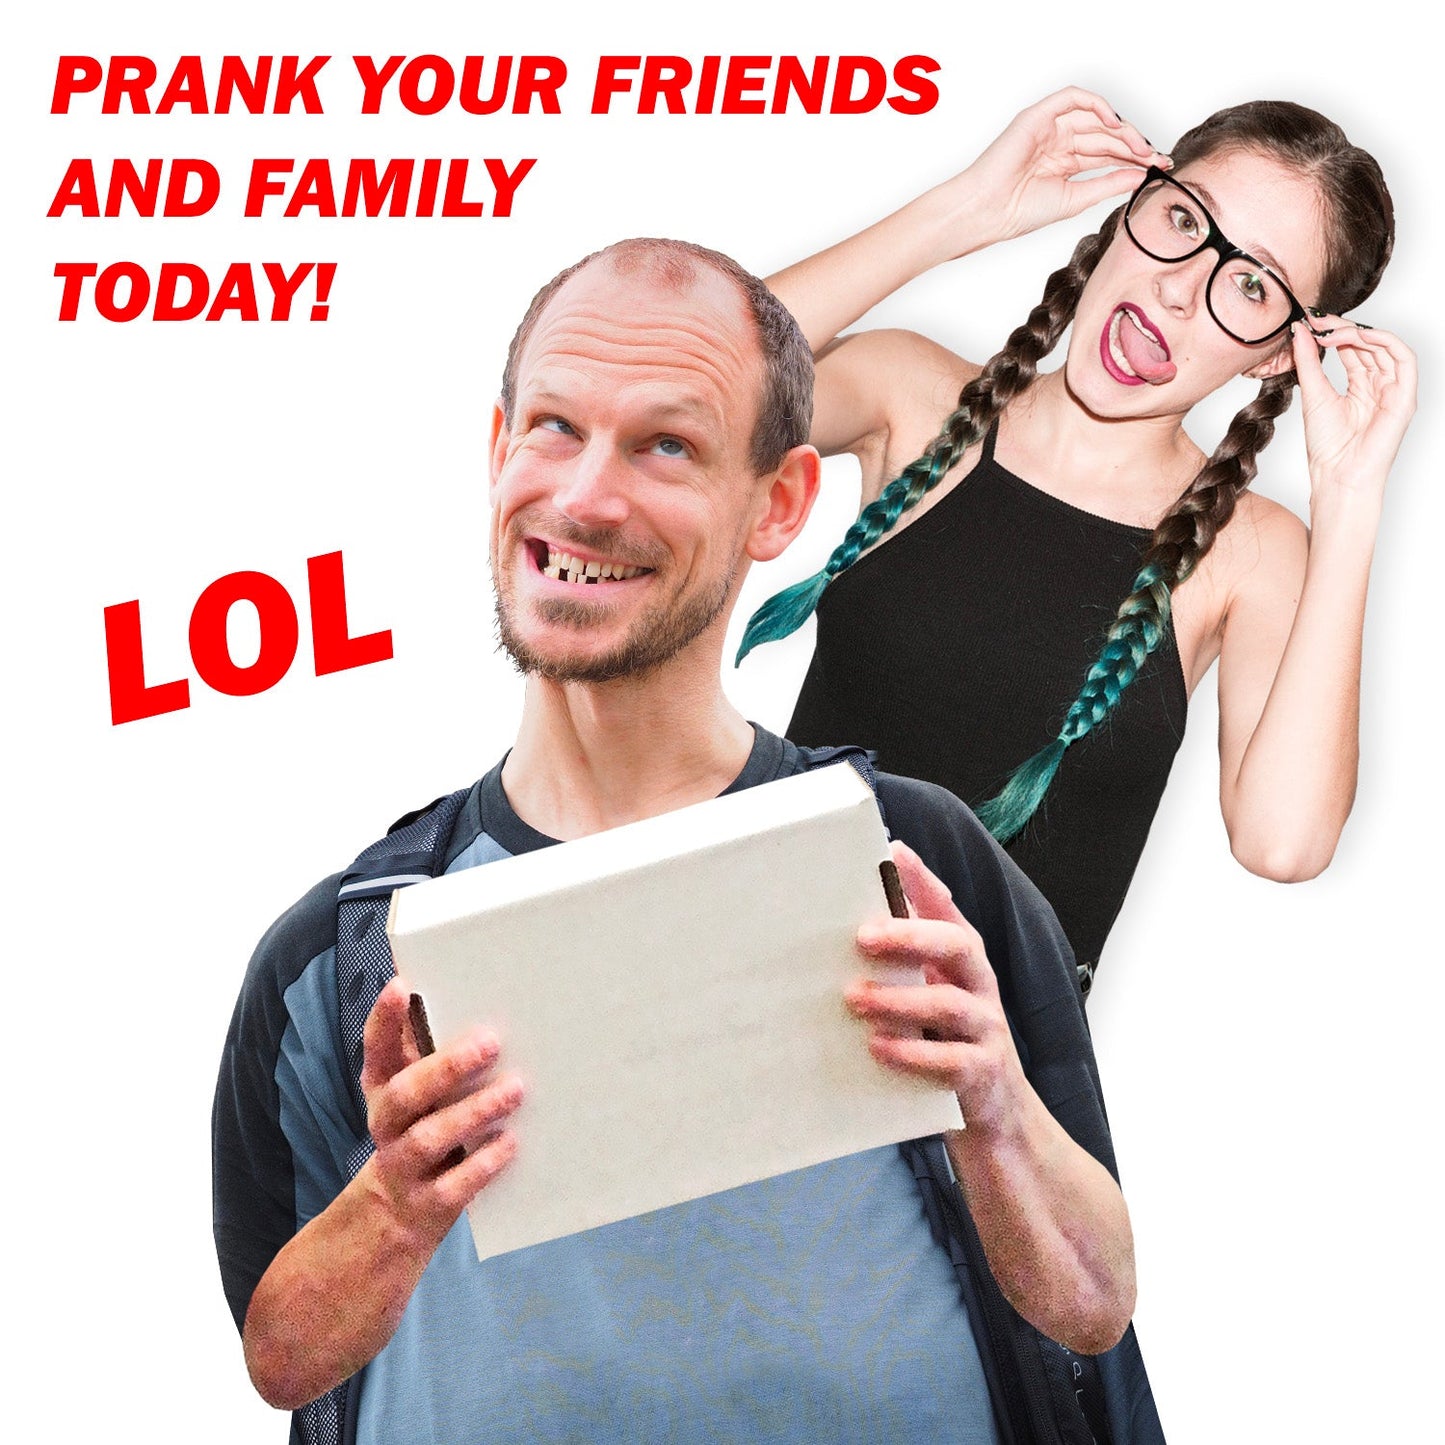 Pet Ghost embarrassing prank box gets mailed directly to your victims 100% anonymously!